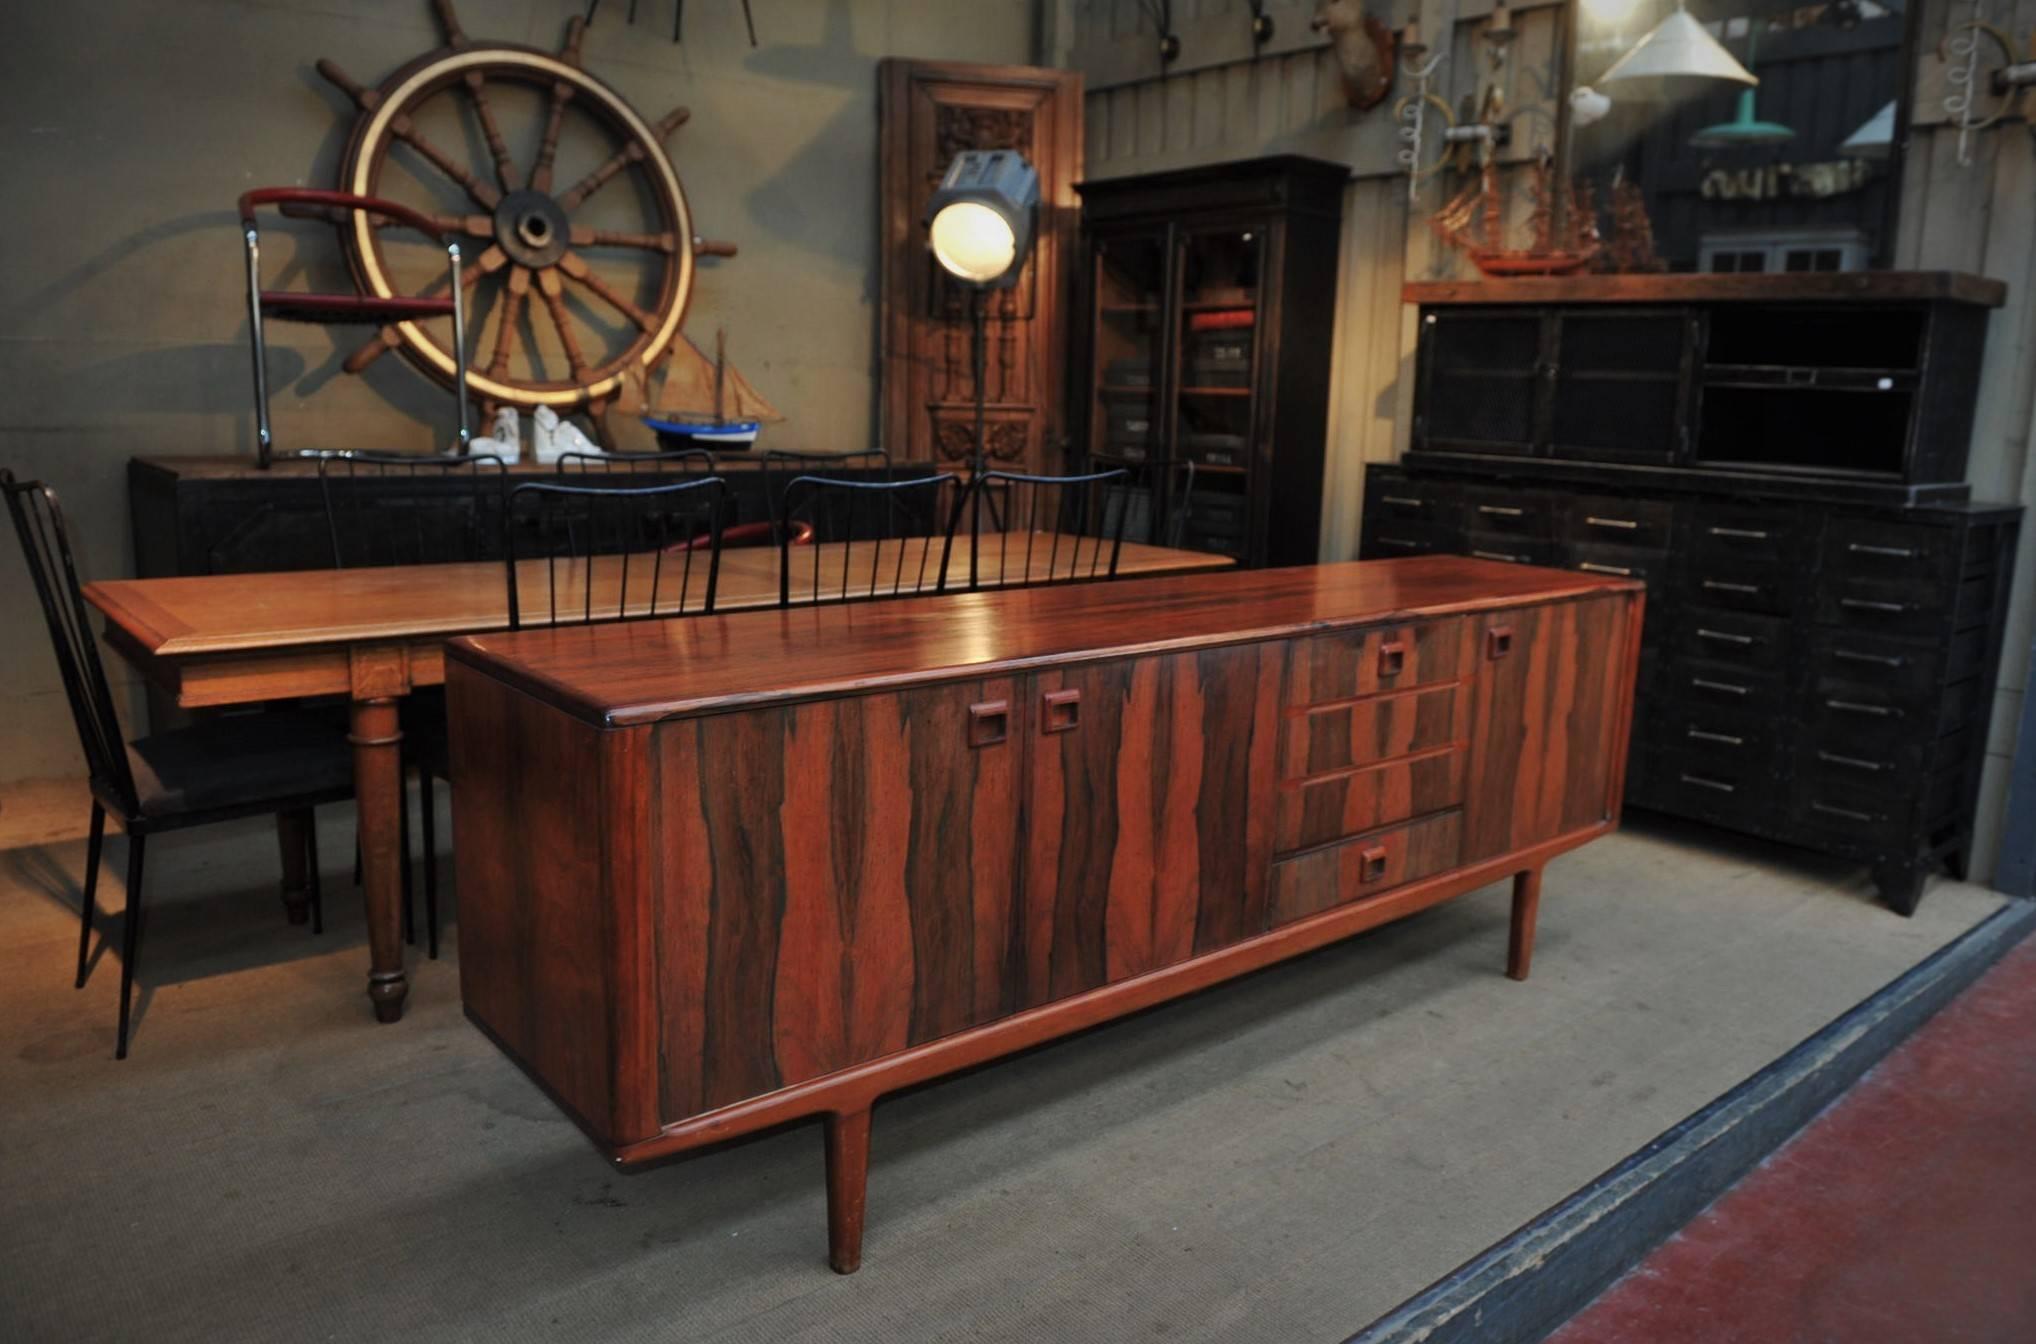 Three doors one drawers and one bar sliding door, Mid-Century
rosewood sideboard credenza, circa 1950.